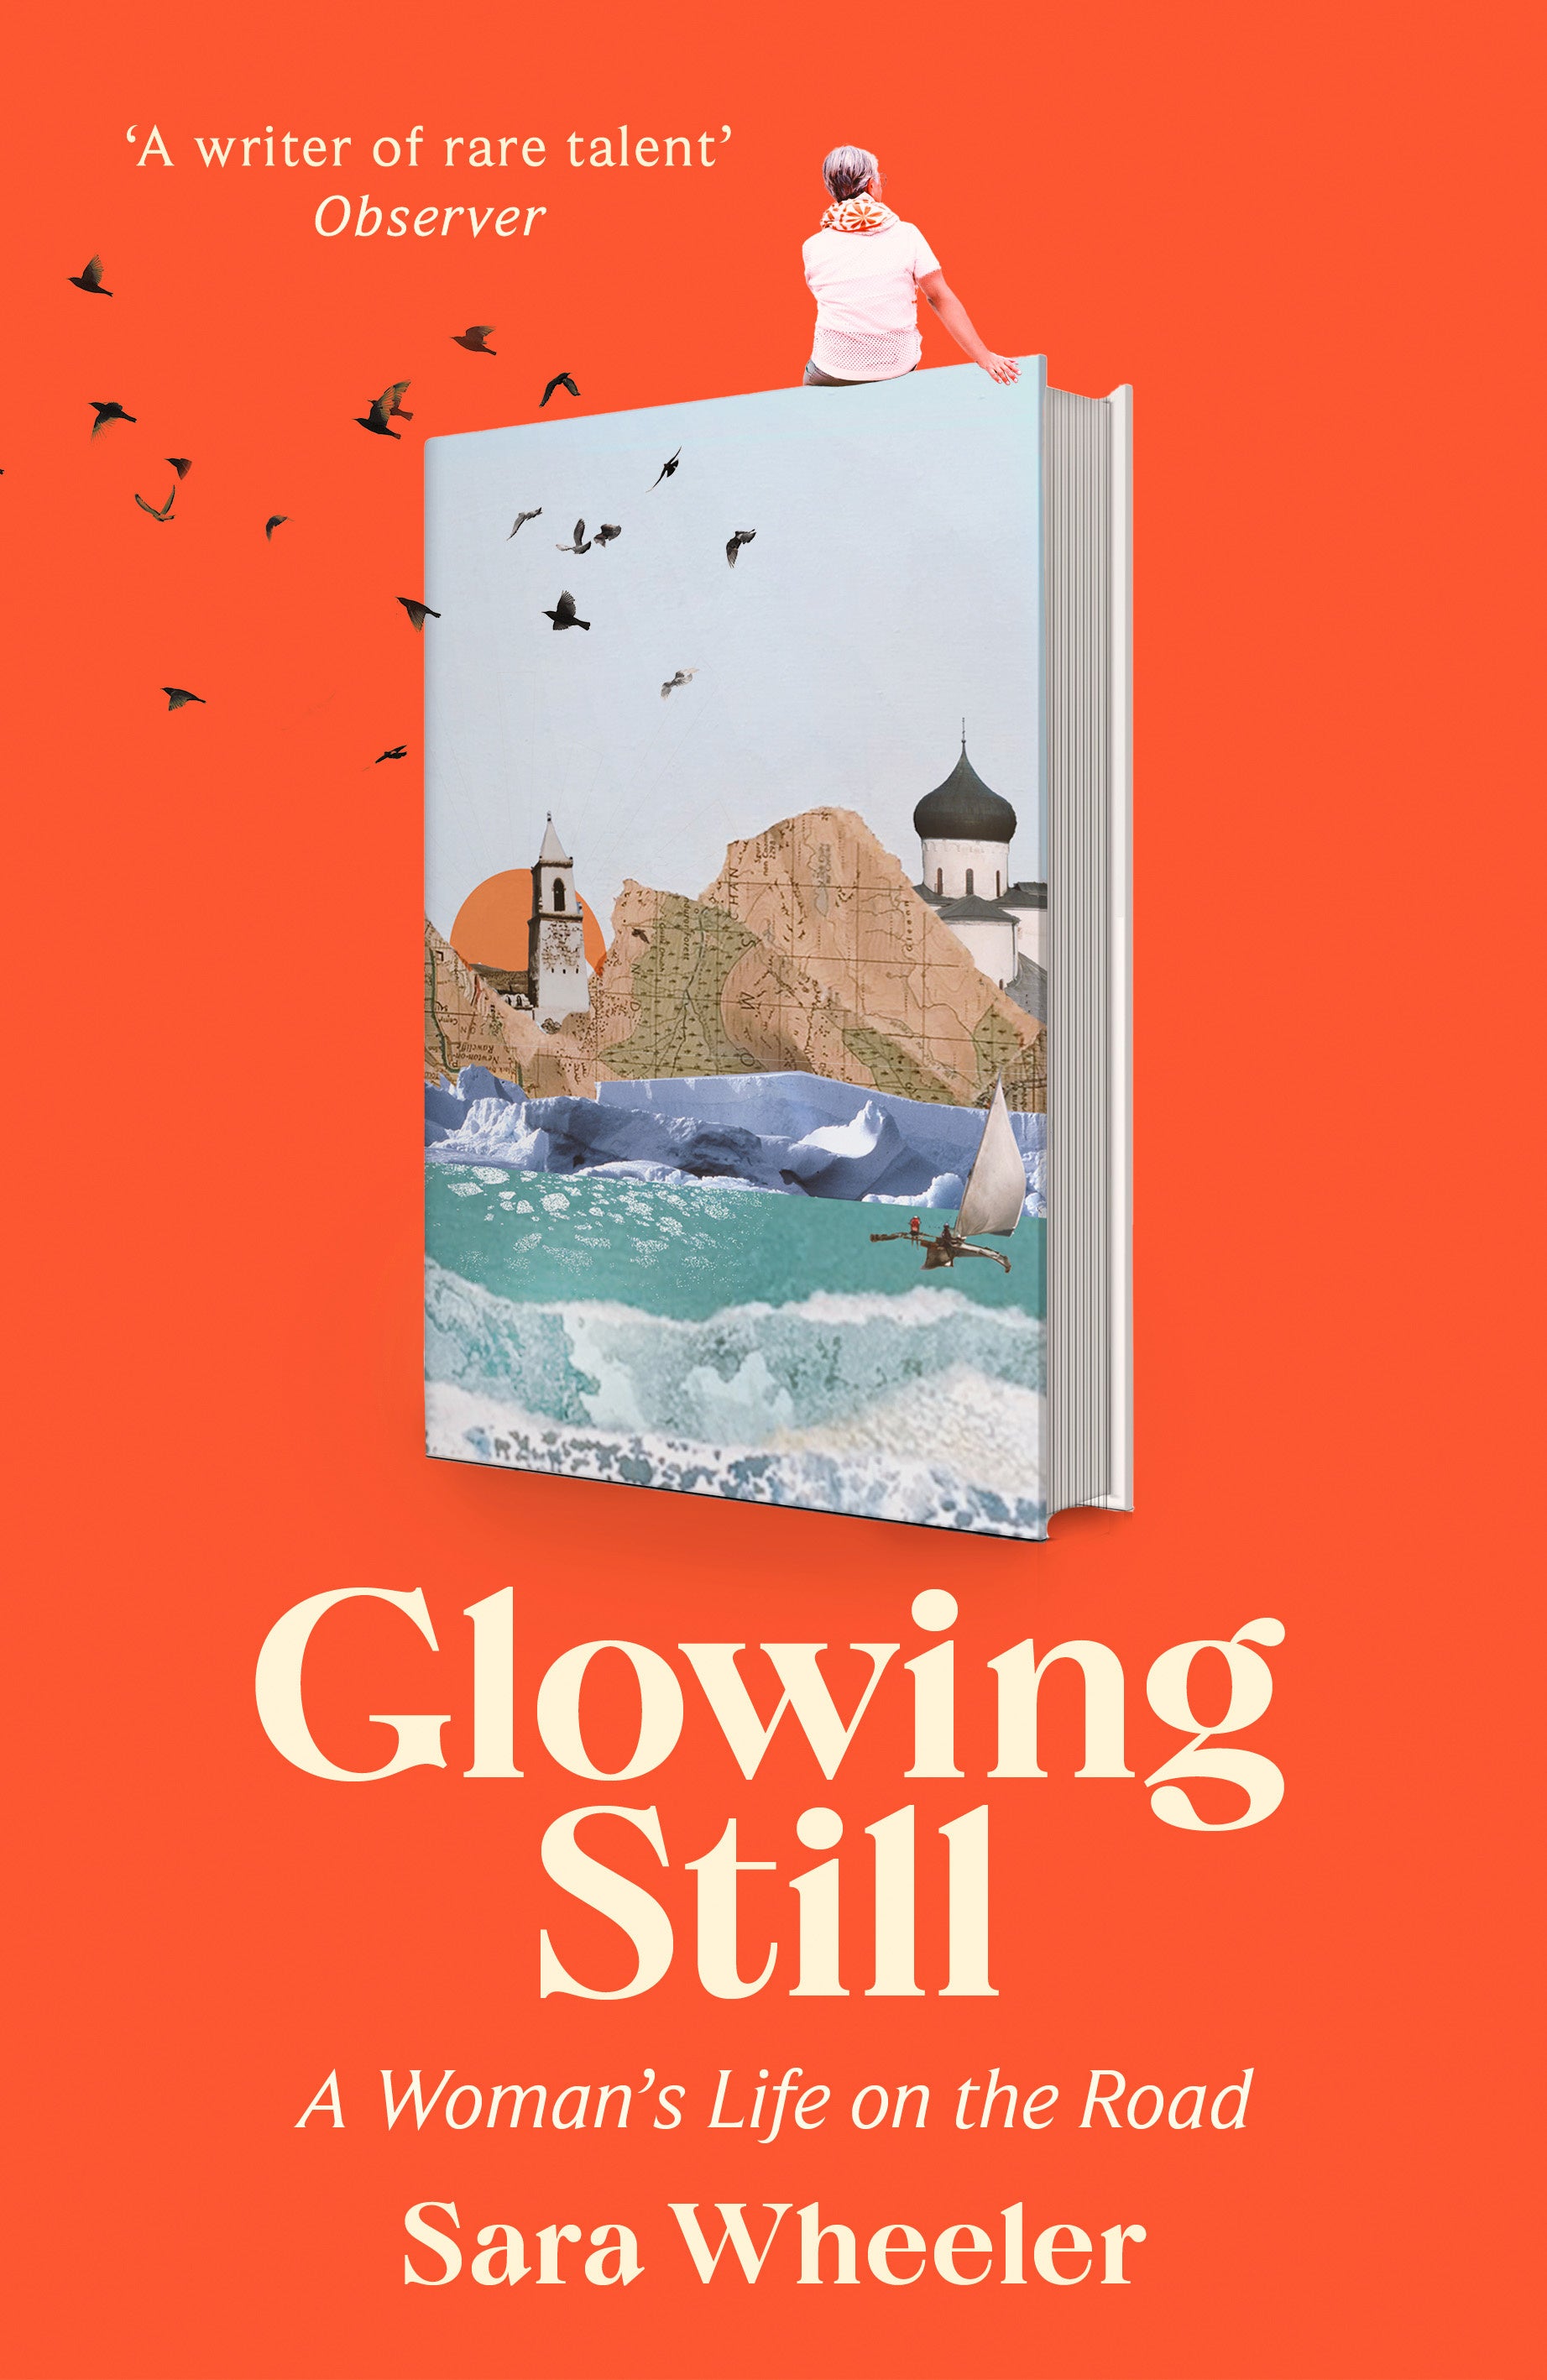 Glowing Still: A Woman's Life on the Road